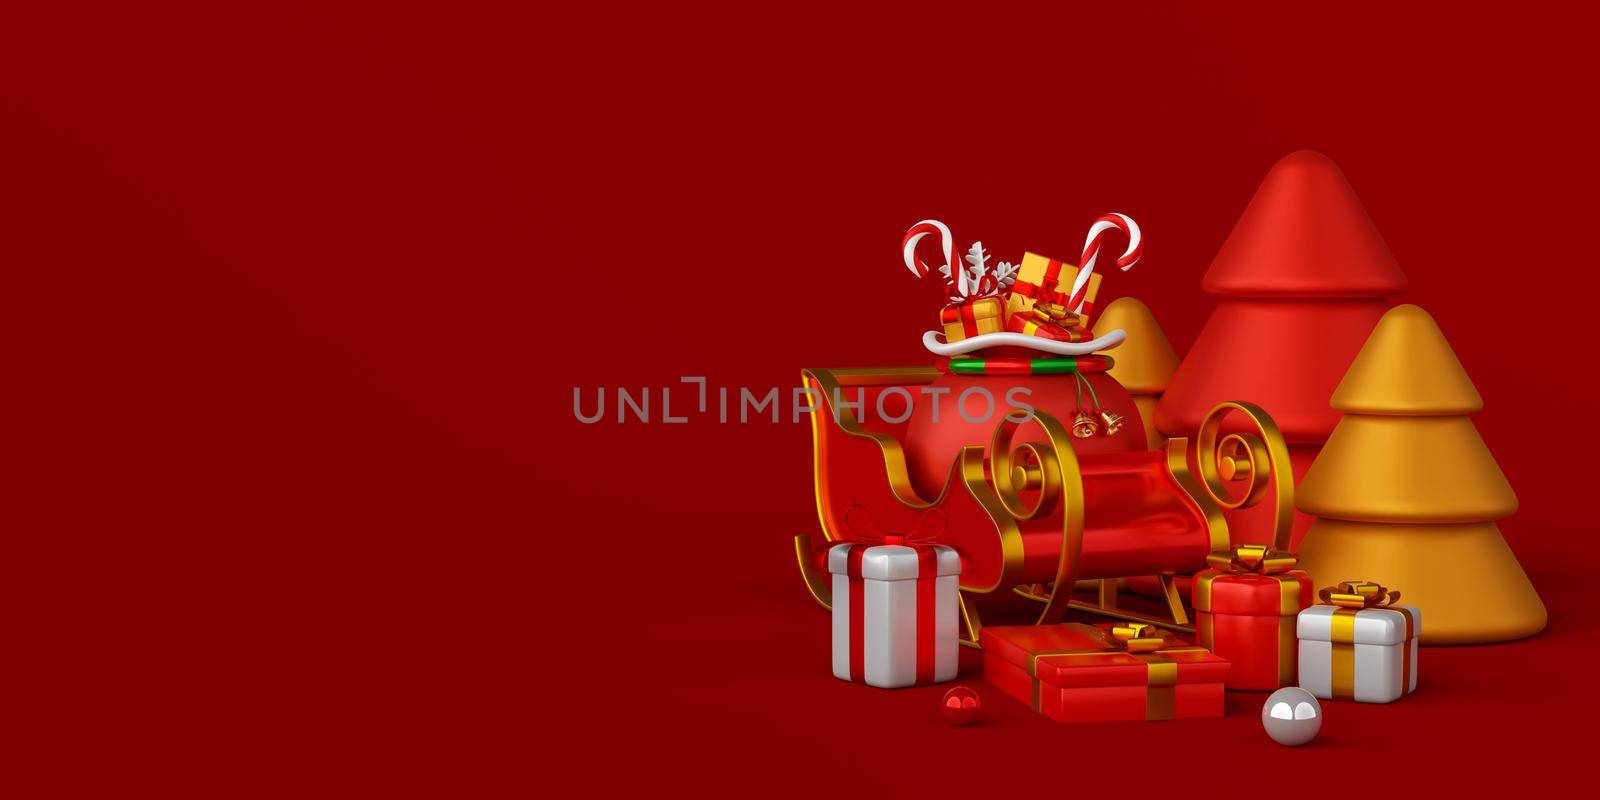 Christmas banner of sleigh with Christmas gift, 3d illustration by nutzchotwarut